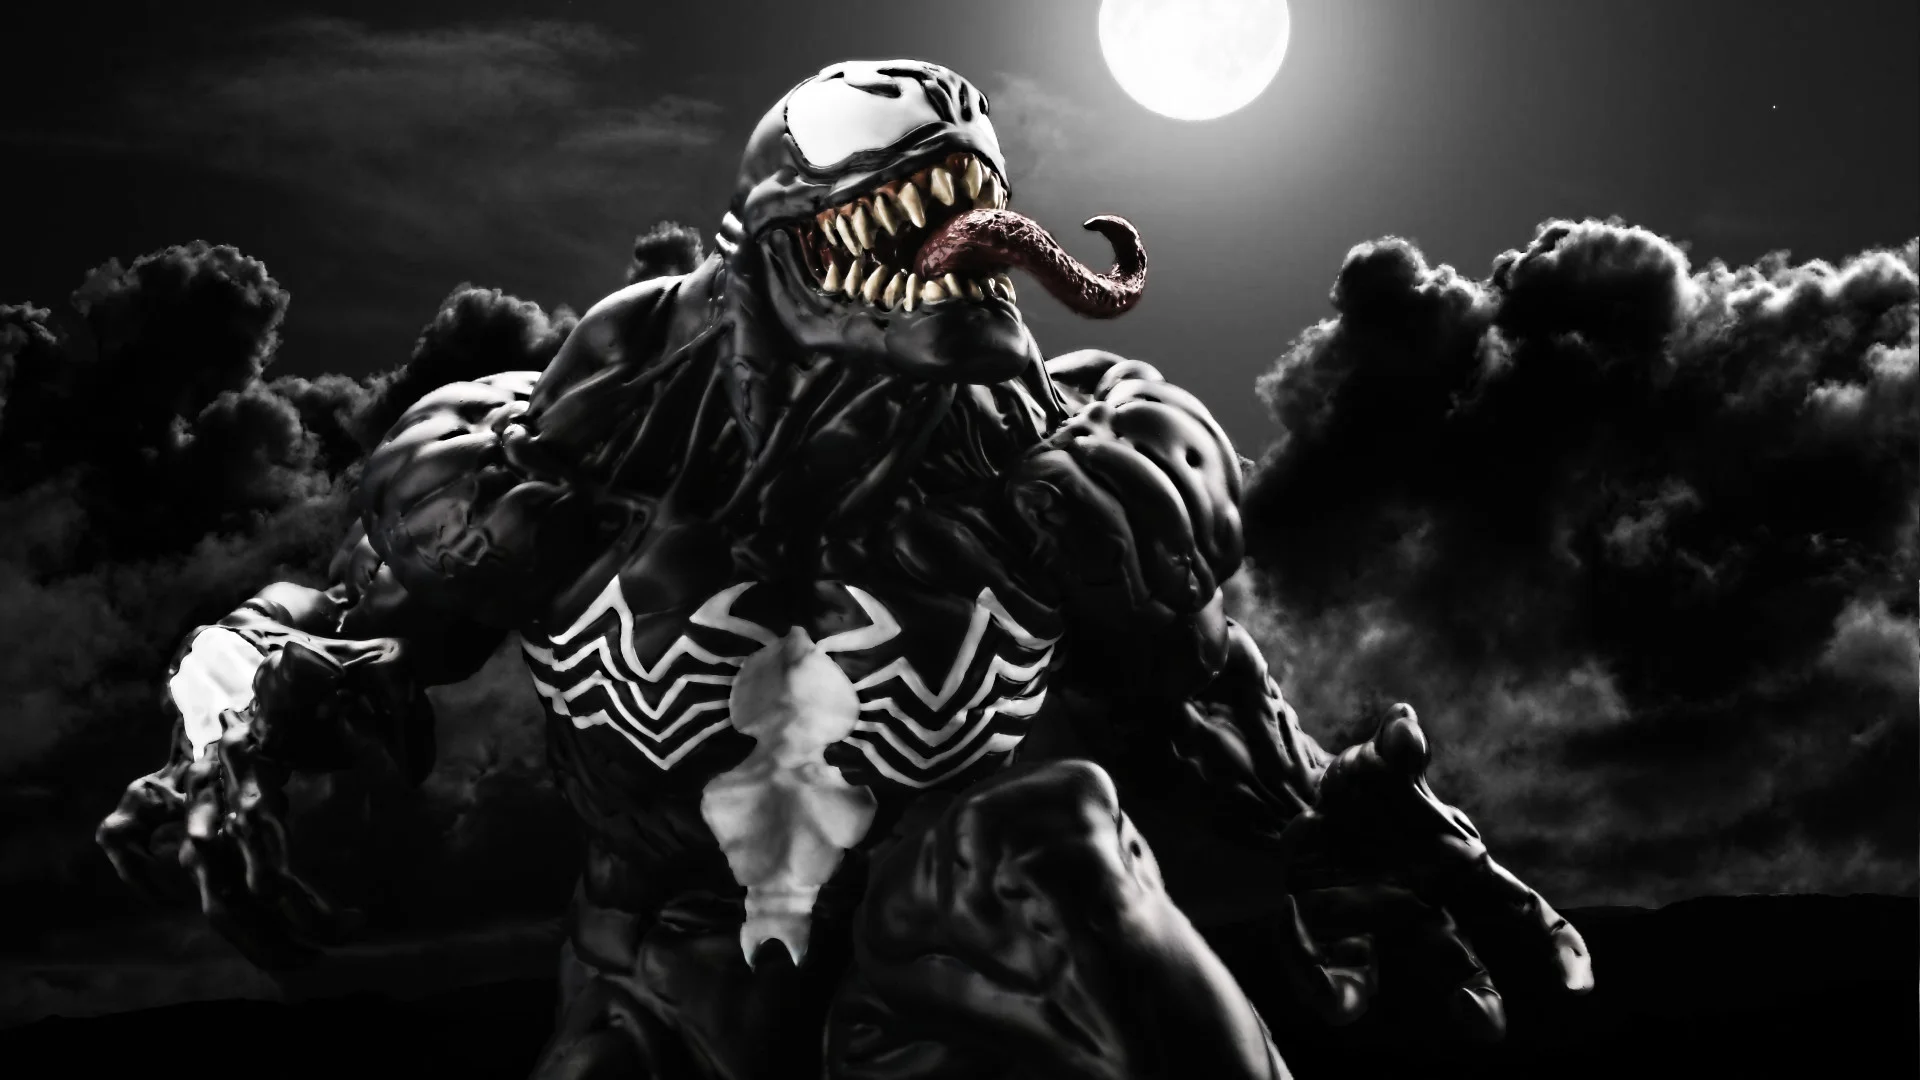 0 Venom Wallpapers Wallpaper Cave Venom Wallpapers Images Photos Pictures Backgrounds